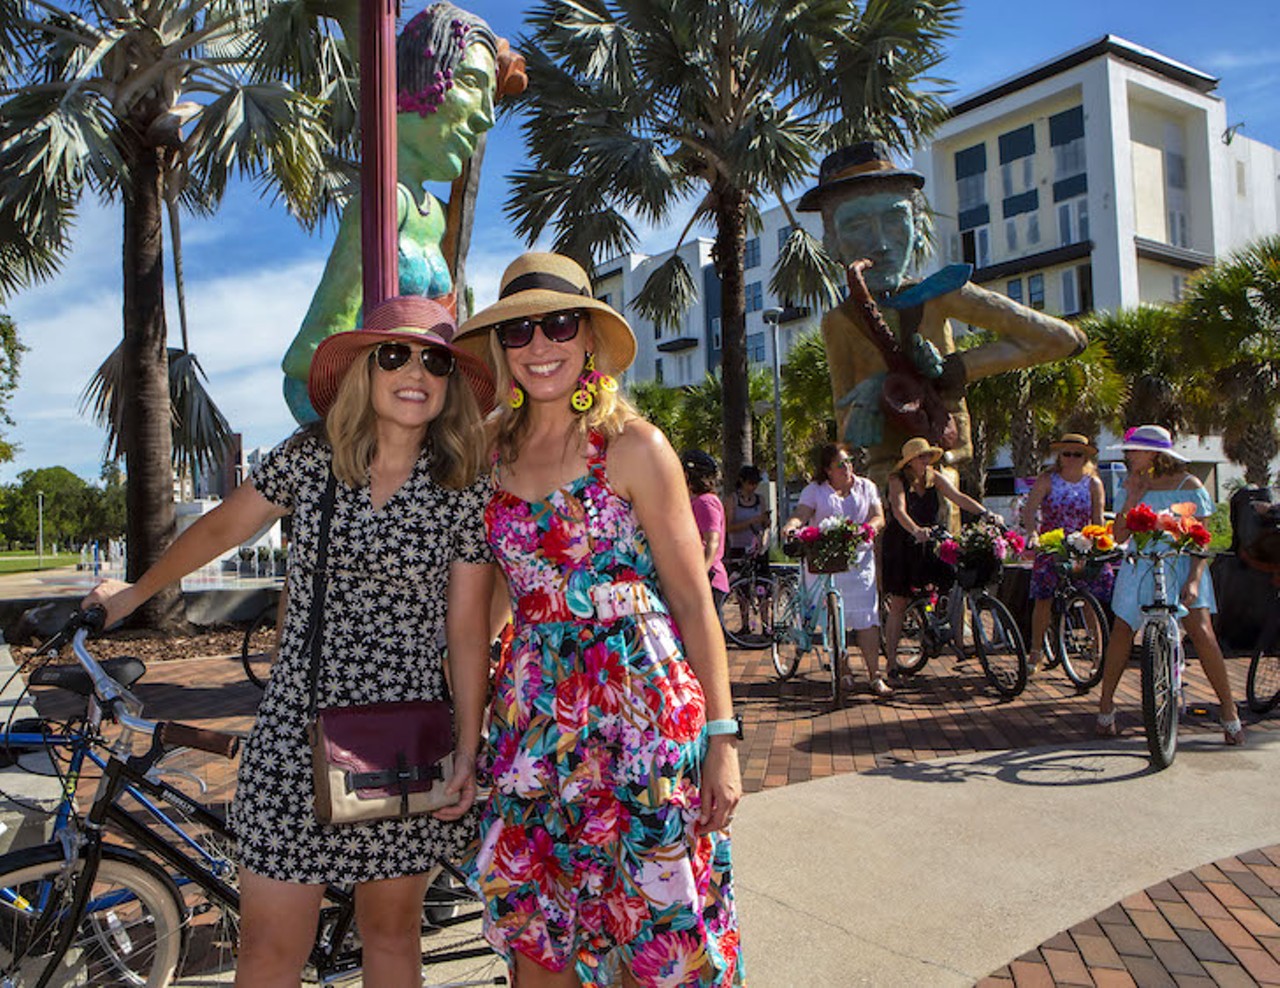 Everything we saw at last weekend&#146;s &#145;Fancy Women Bike Ride&#146; in downtown Tampa